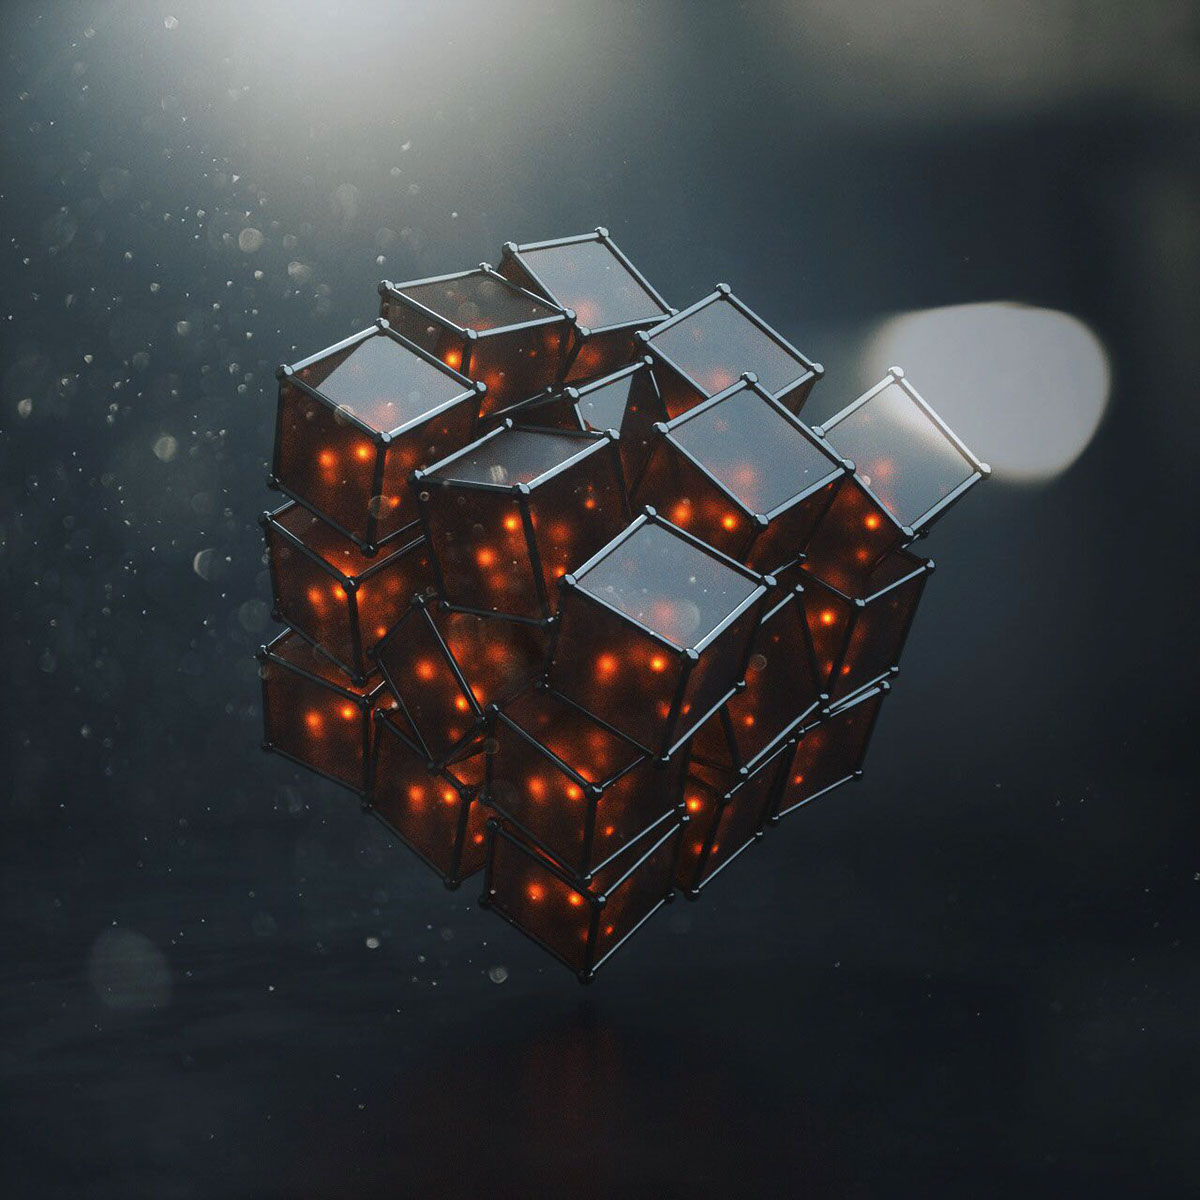 joey camacho cinema 4d Contained photoshop cube glow trapped dark dust macro